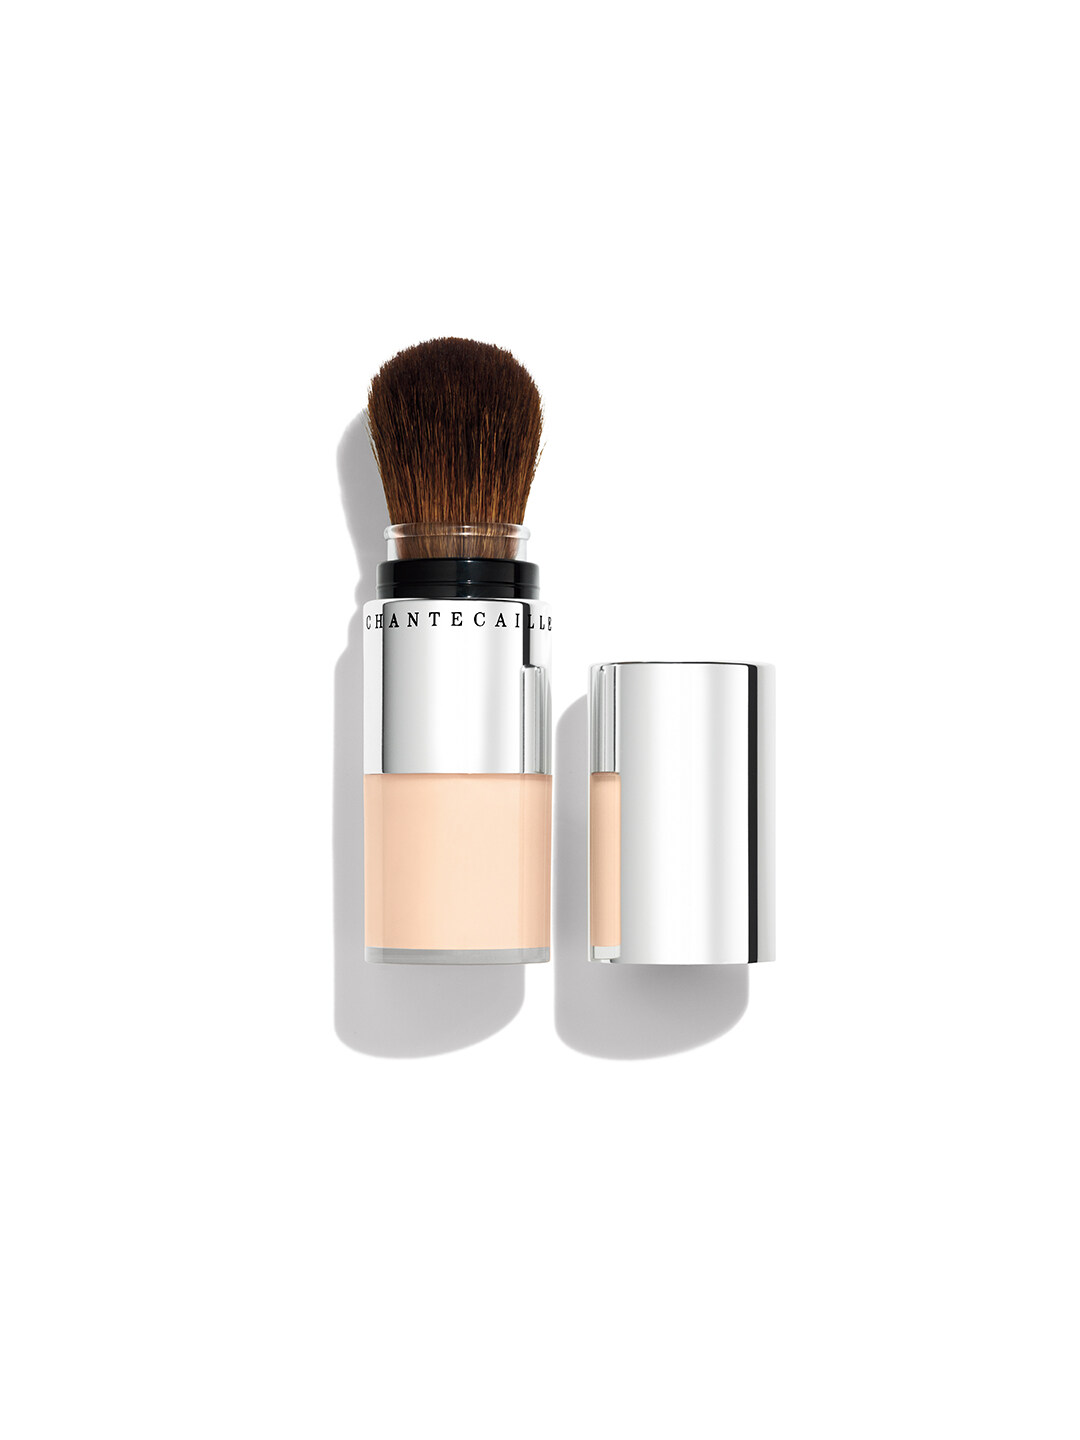 Chantecaille HD Perfecting Loose Powder Candlelight $670